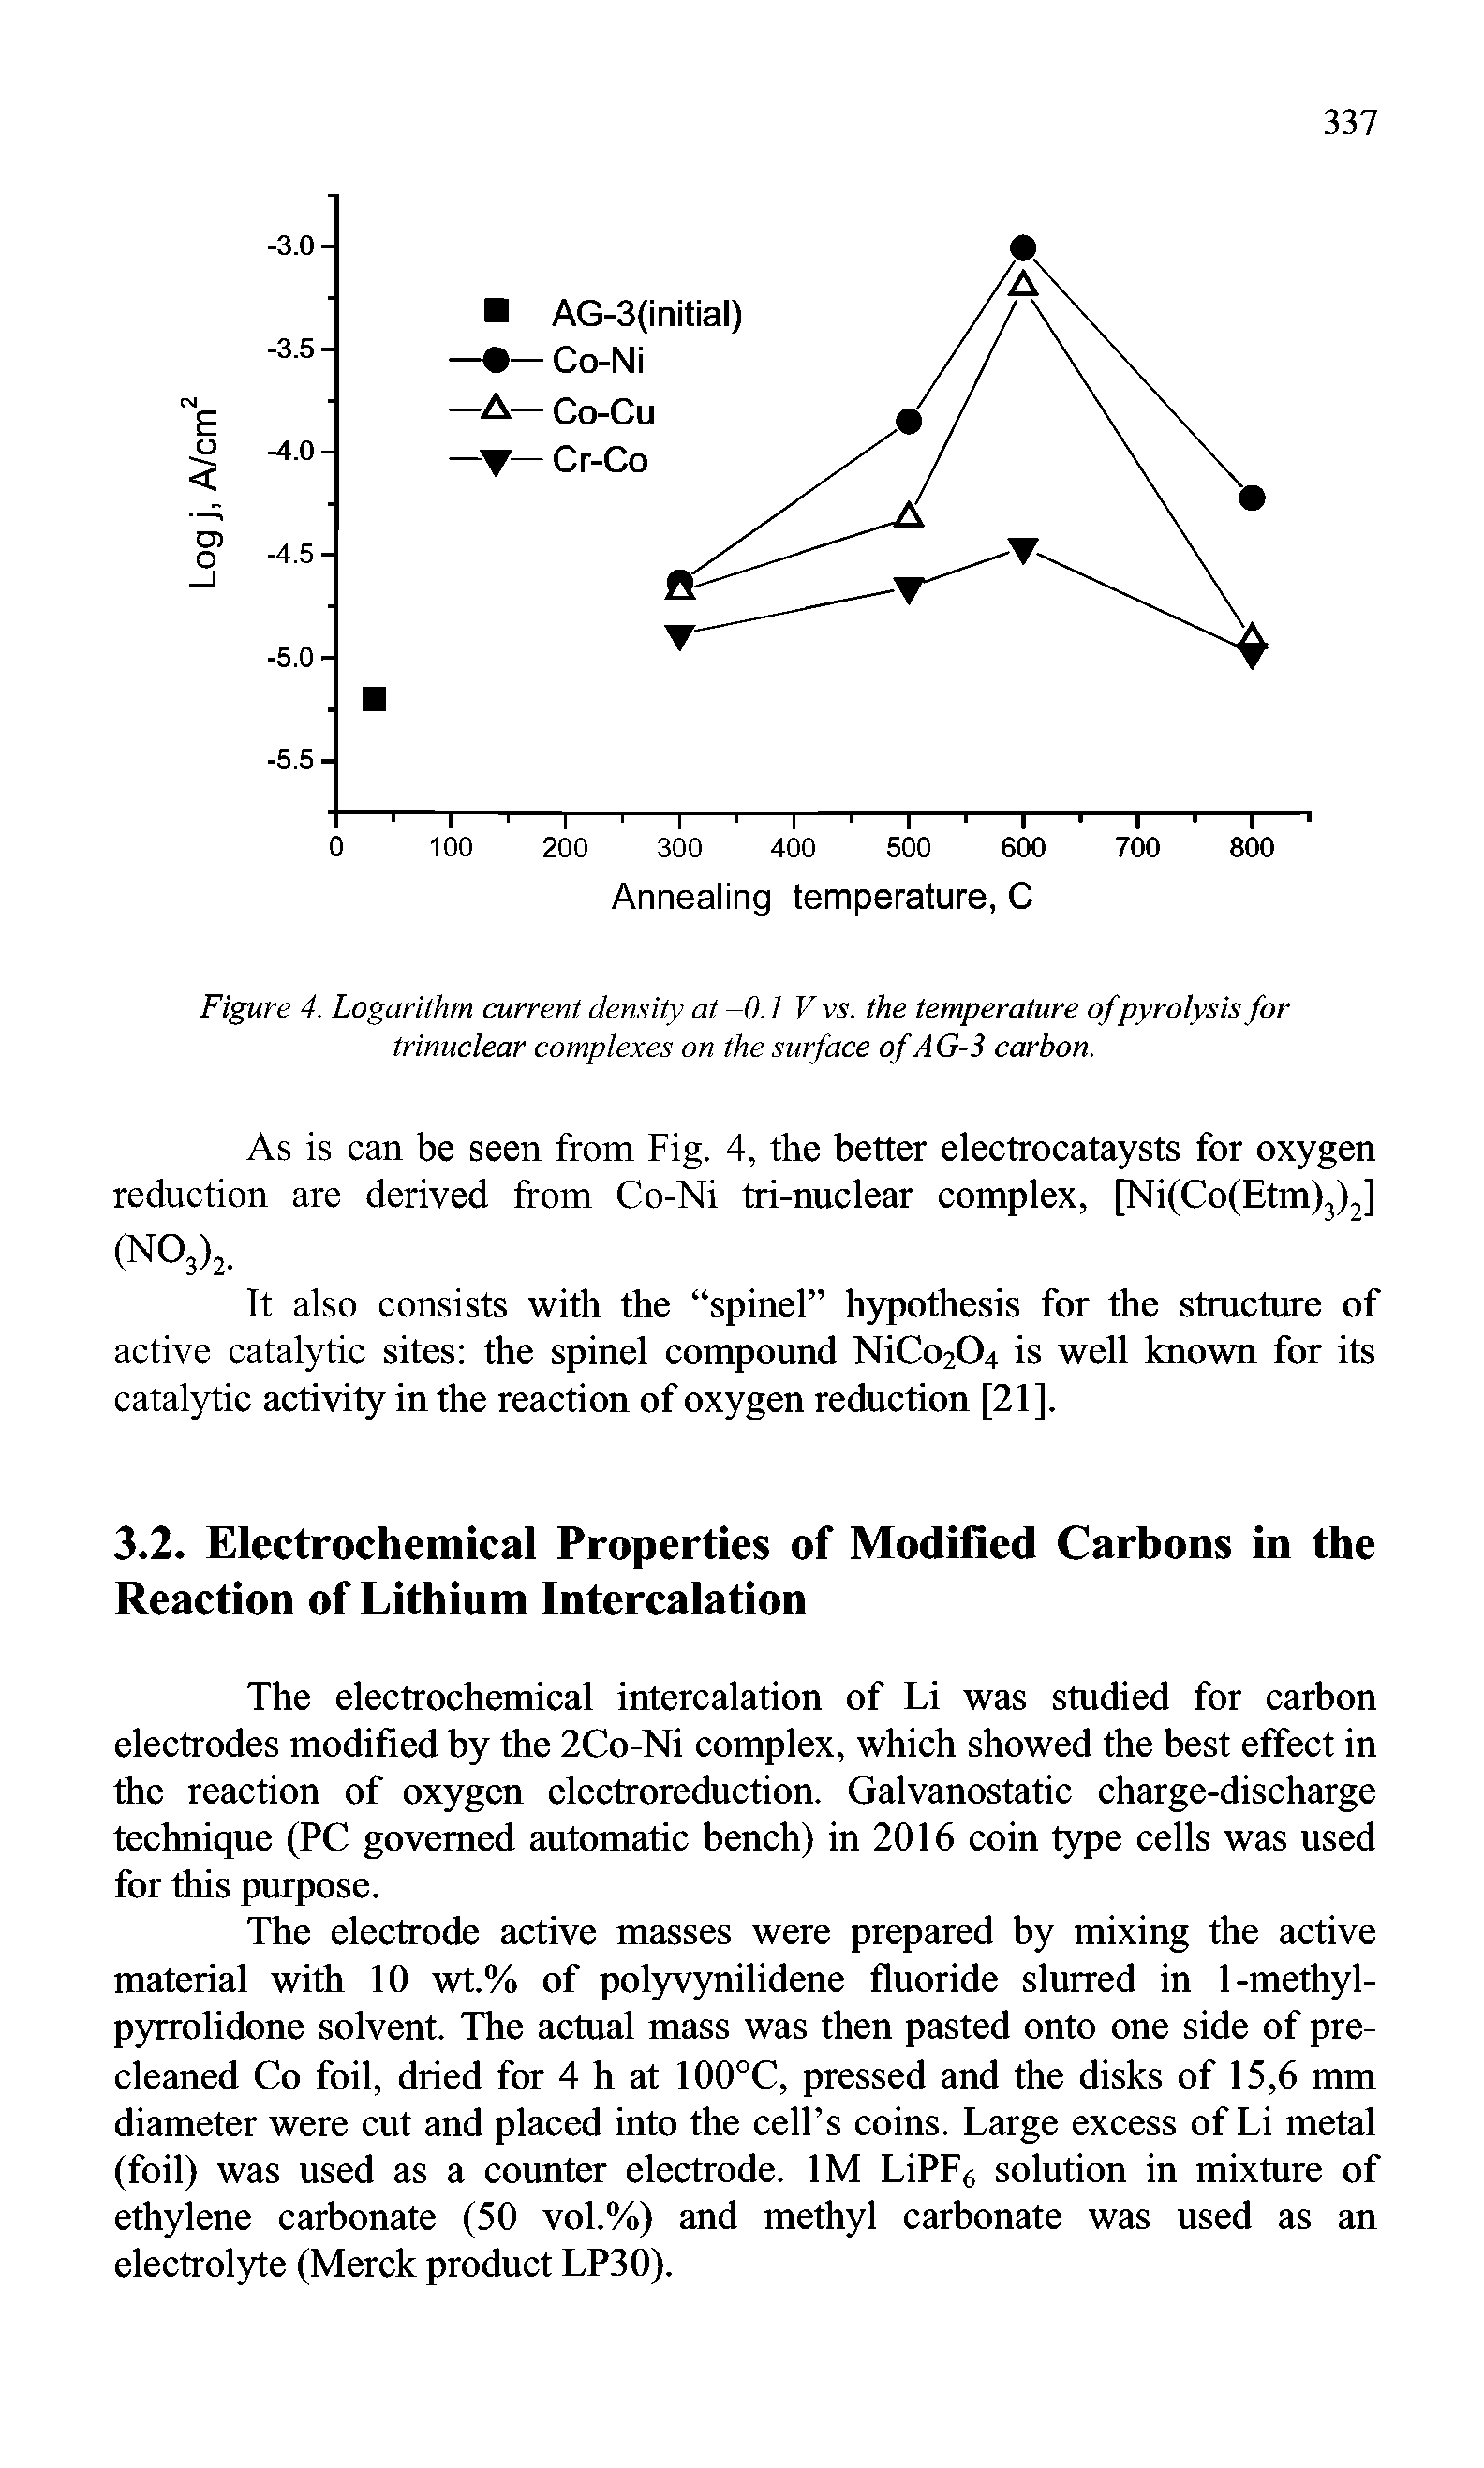 Figure 4. Logarithm current density at -0.1 V vs. the temperature ofpyrolysis for trinuclear complexes on the surface of AG-3 carbon.